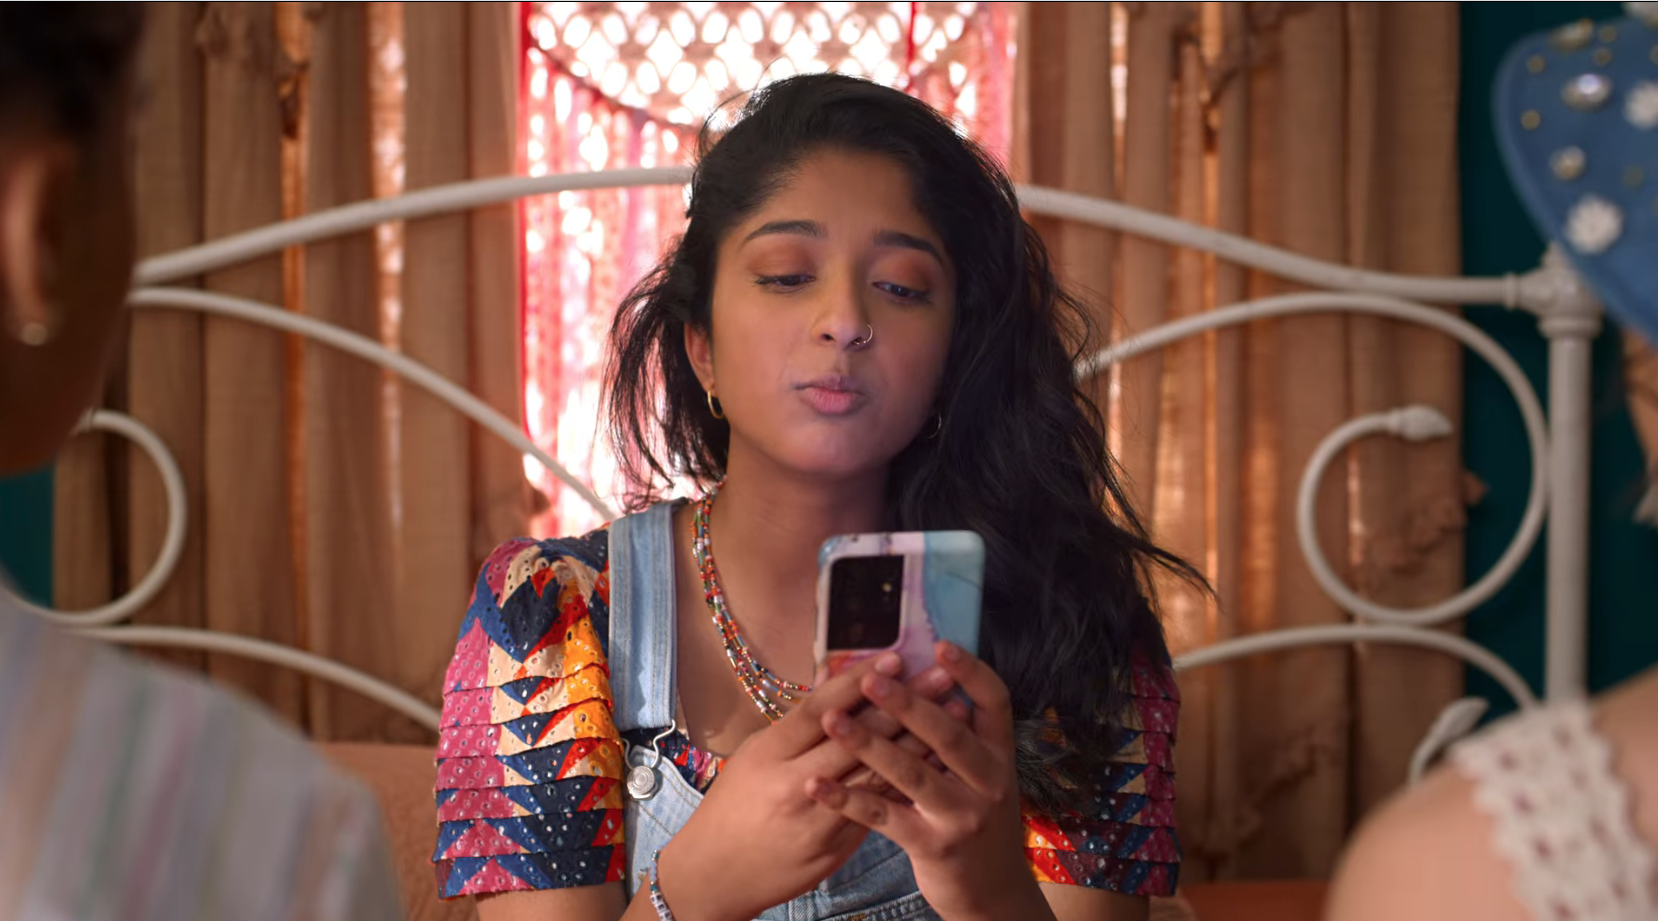 Devi from &quot;Never Have I Ever&quot; on Netflix sits on her bed, looks at her phone as if texting or on an app.